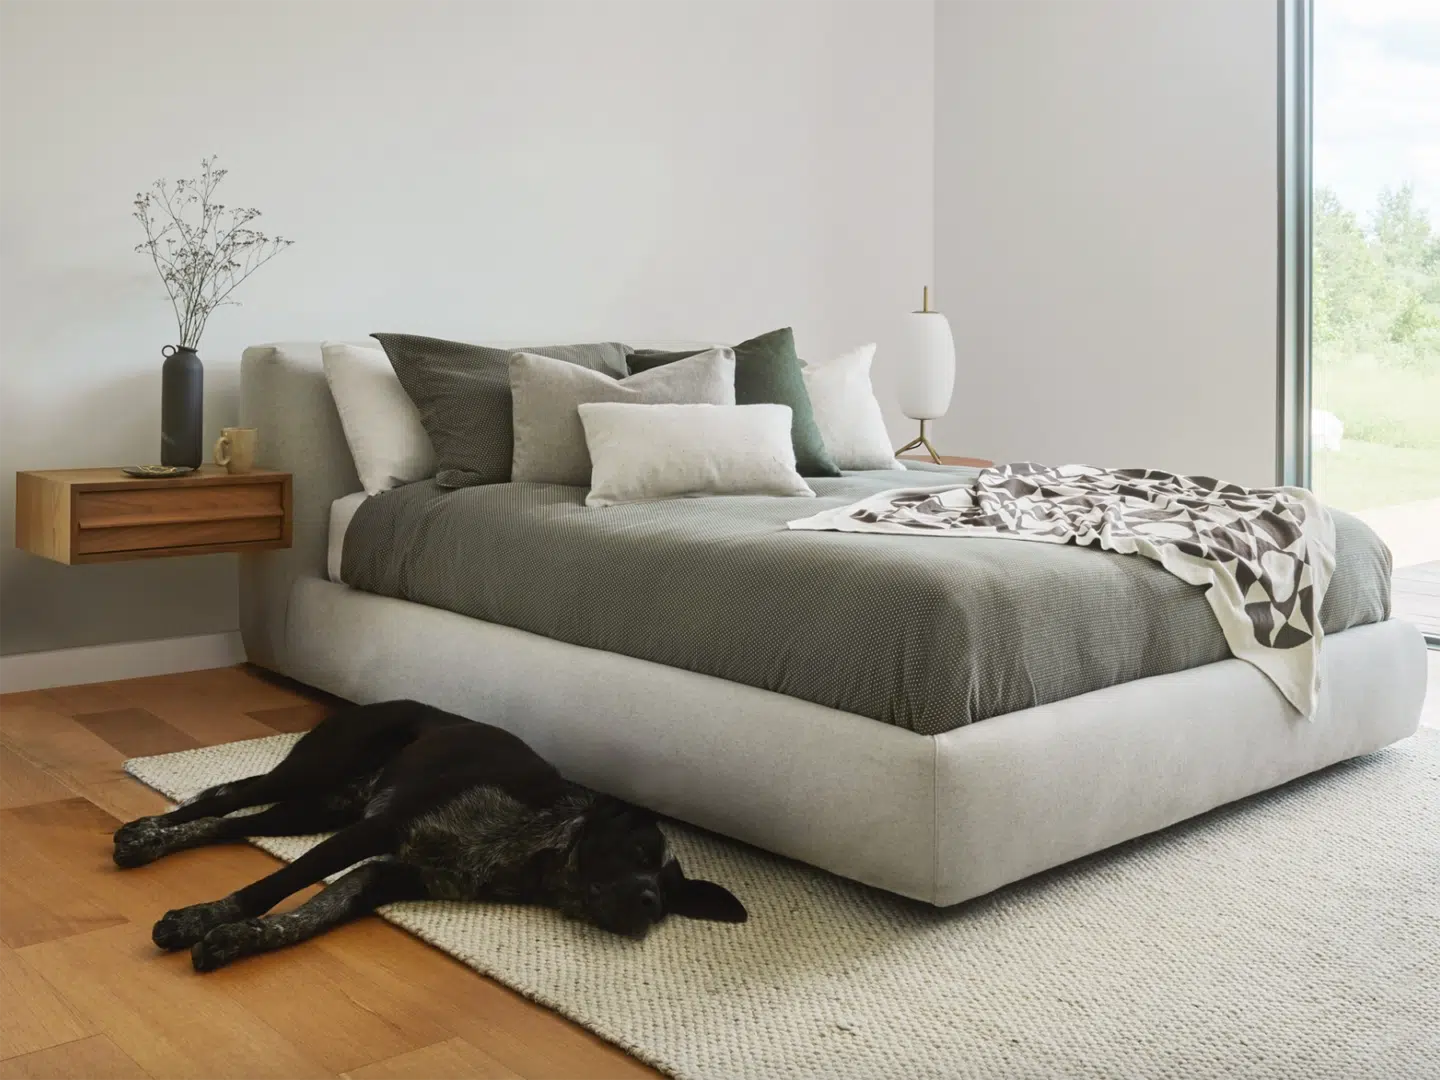 Top Cloud bed frame dupe picks, by home blogger What The Fab